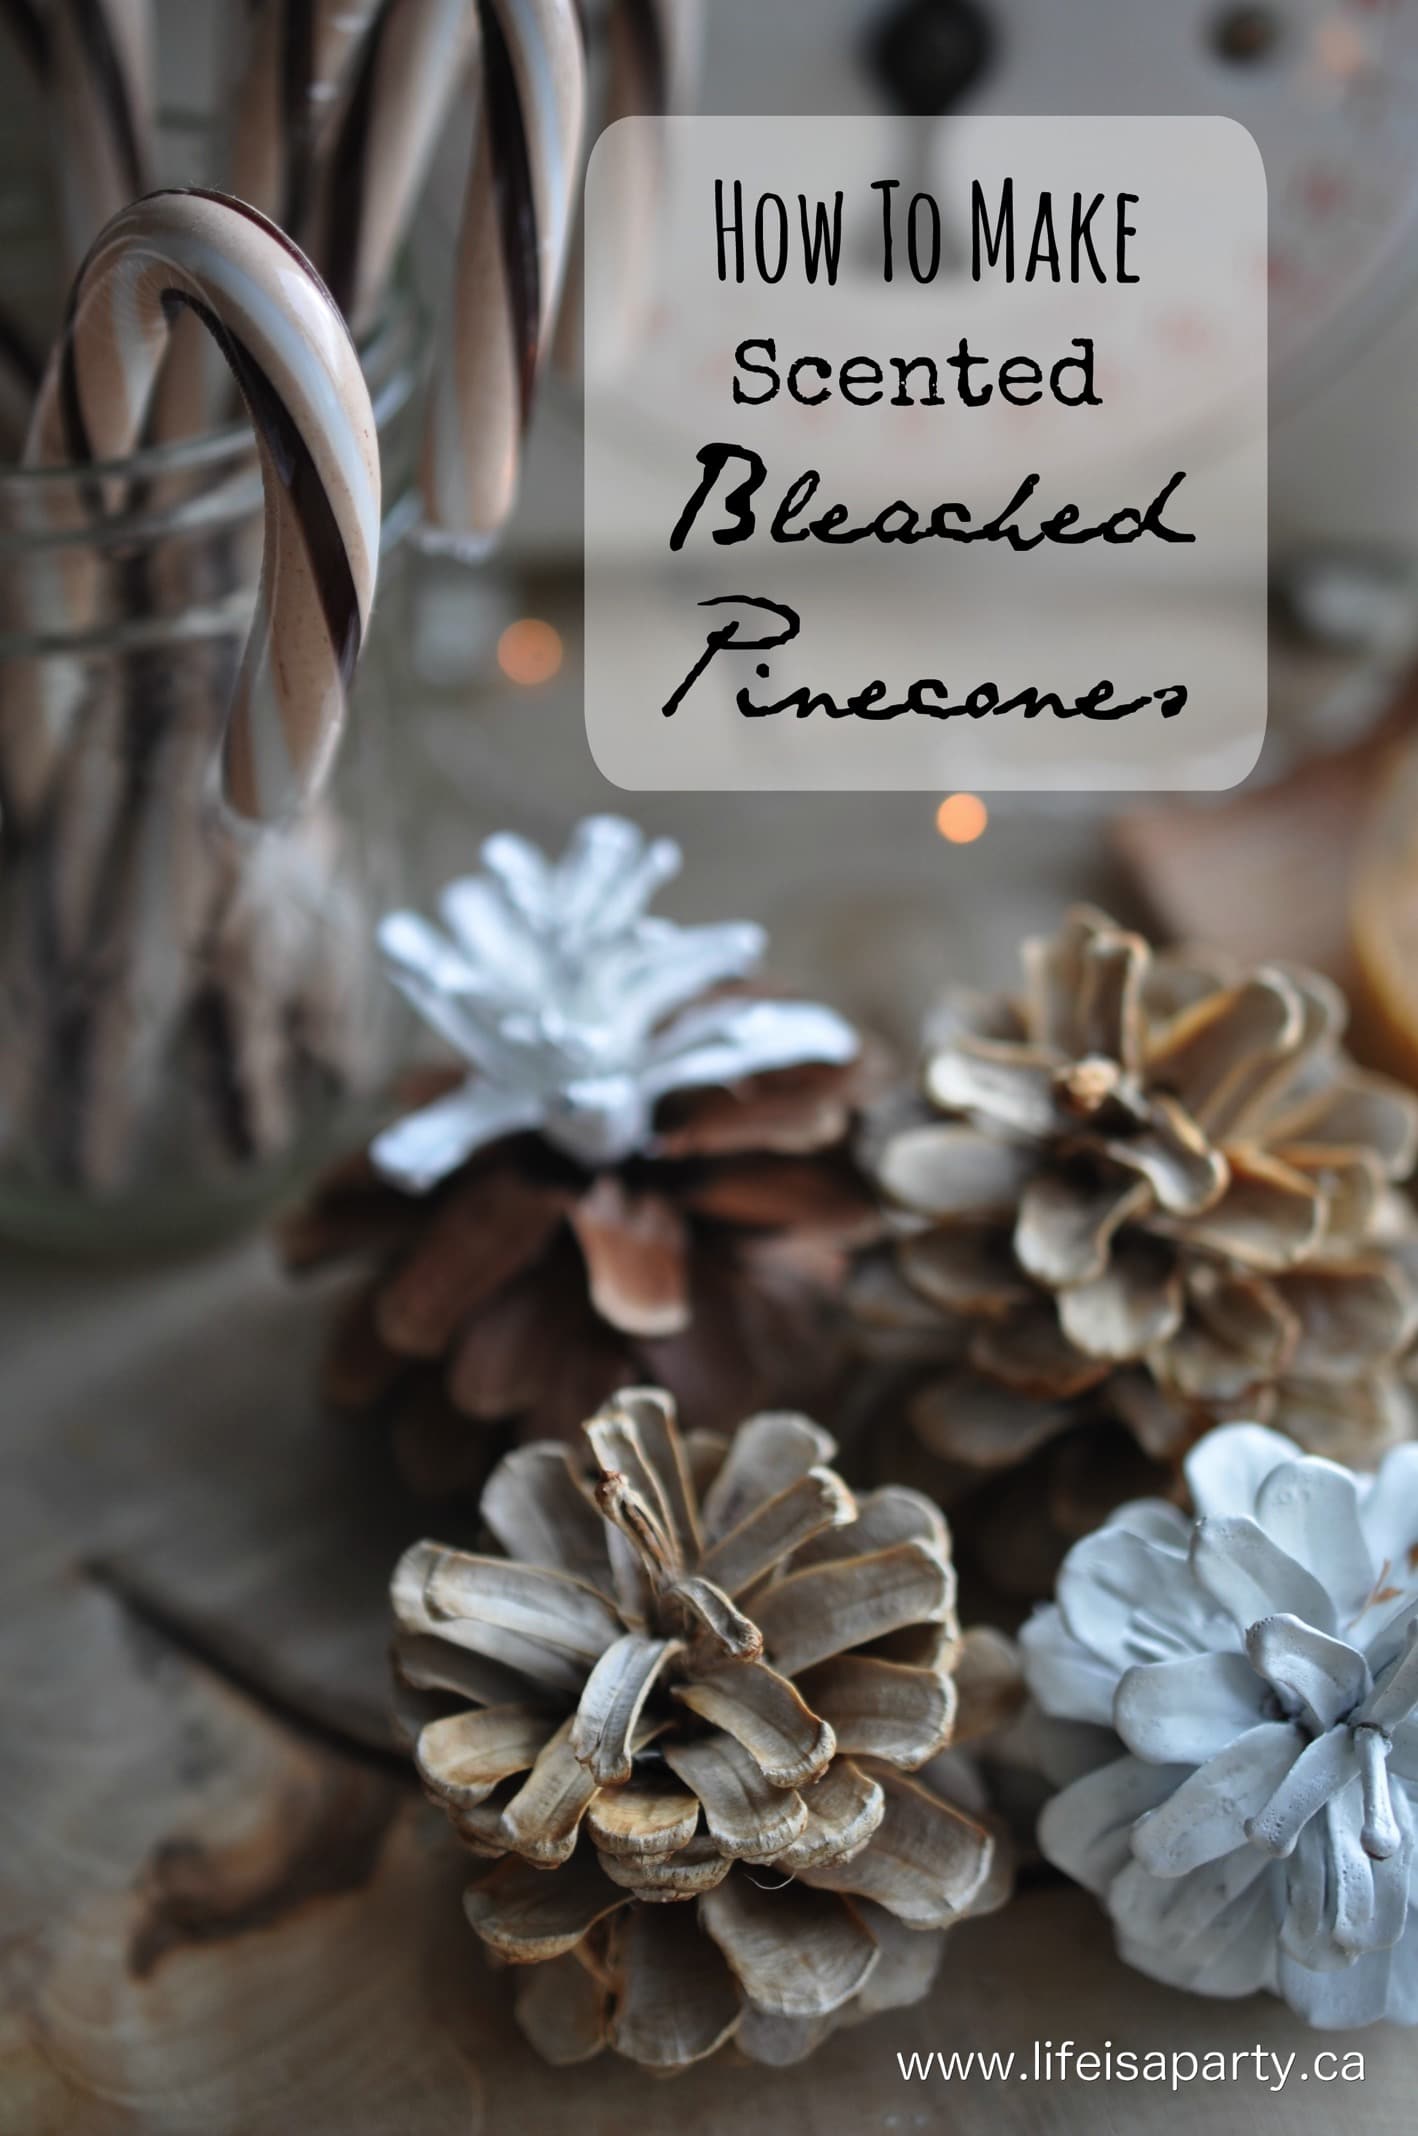 Scented Bleached Pinecones -use simple household bleach to whiten and brighten natural pinecones, and then add any scent to them you like.